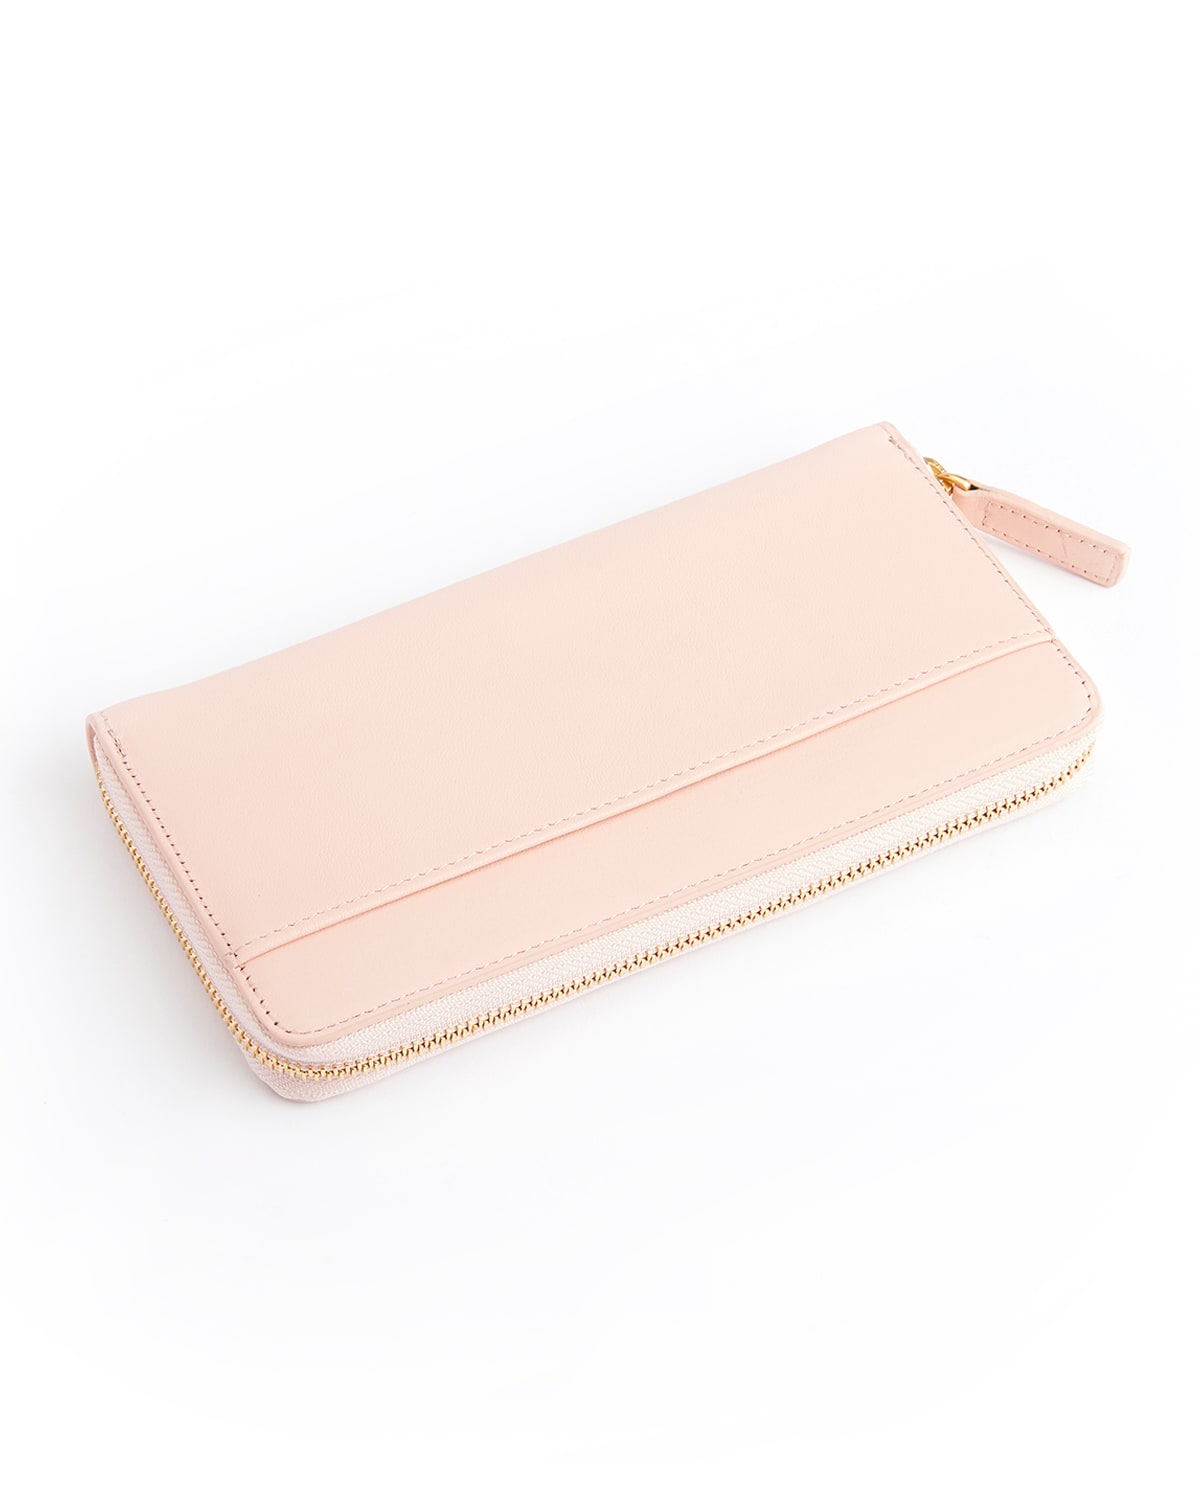 Royce New York Rfid Blocking Continental Wallet, Personalized In Blush Pink